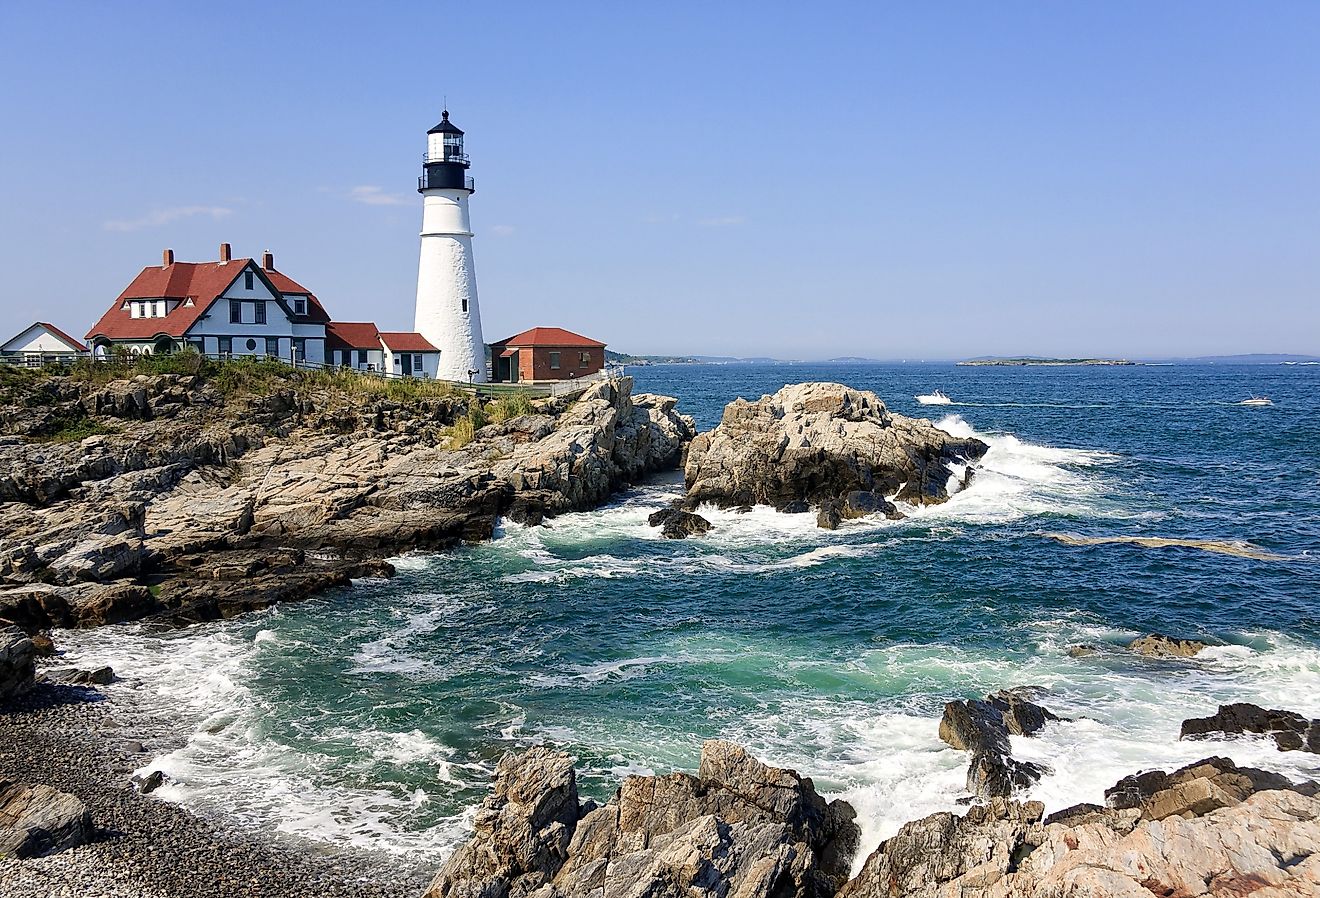 Lighthouse in Portland, Maine and waves crashing on the rocky shore.